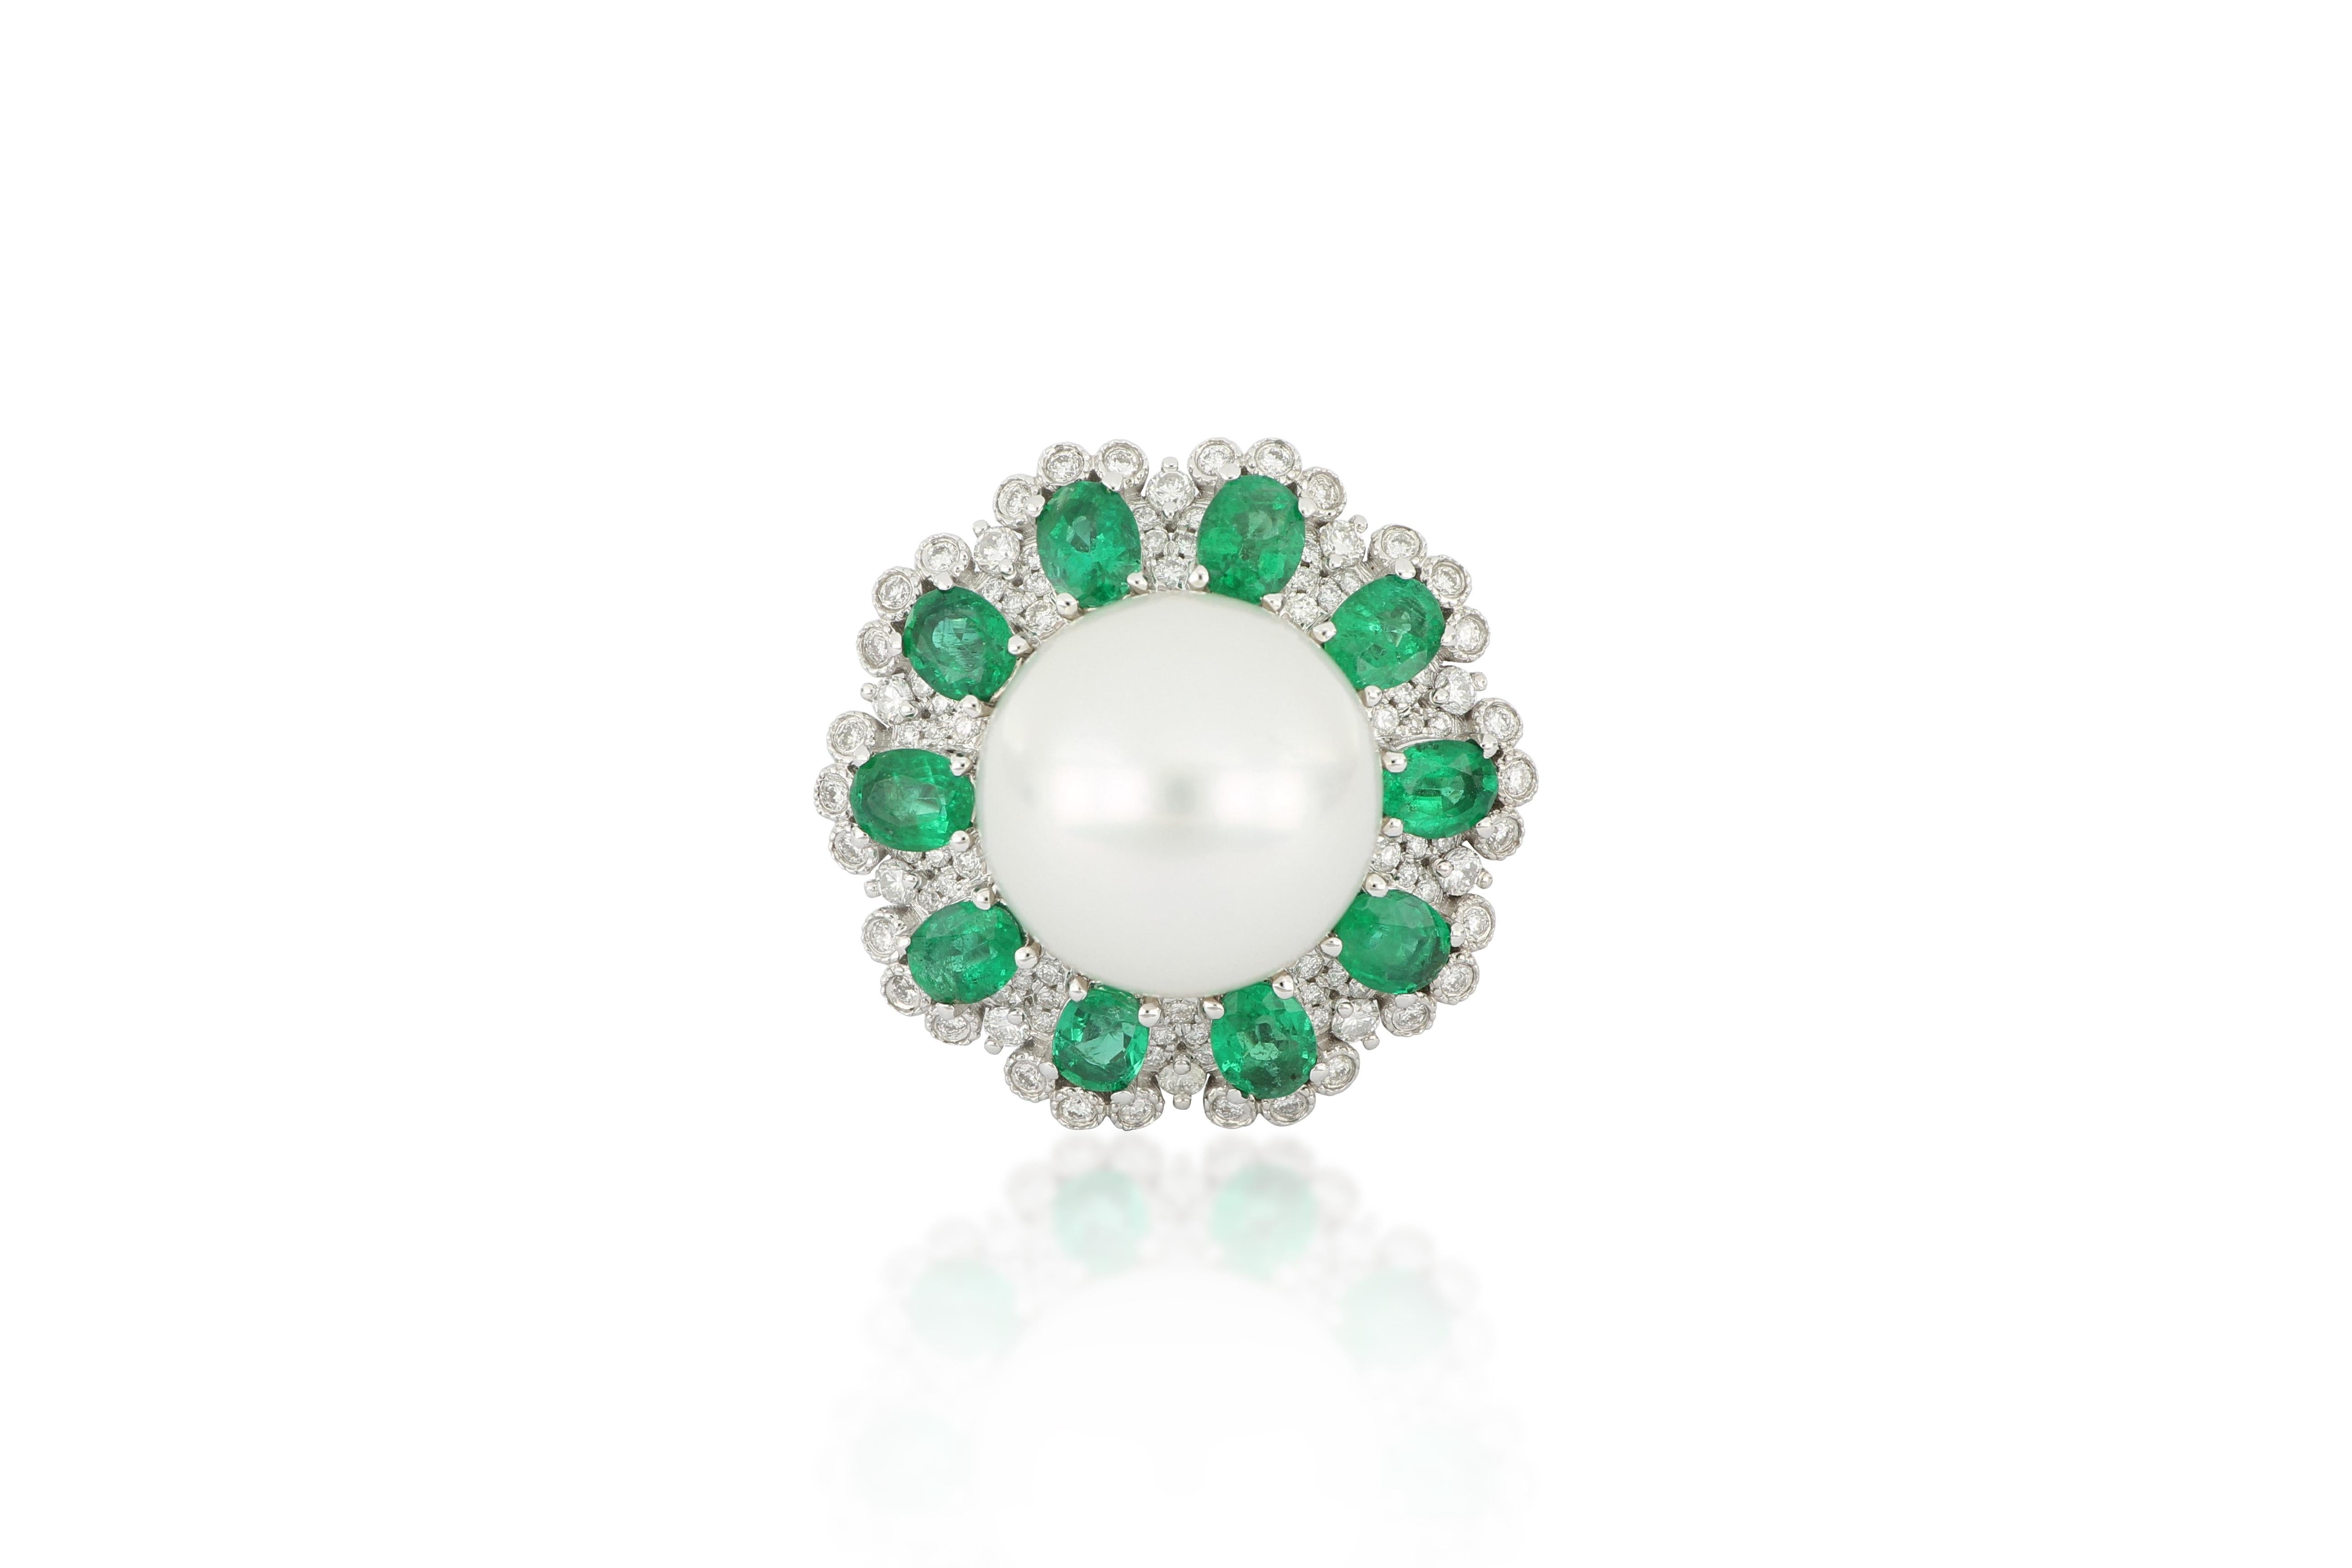 The magnificent ring is centering on a South Sea pearl of size 12.5mm-13mm with very good luster, surrounded by  10 pieces of emerald weighing 1.72 carats and brilliant cut diamonds totaling 0.46 carats.
The company was founded one and a half